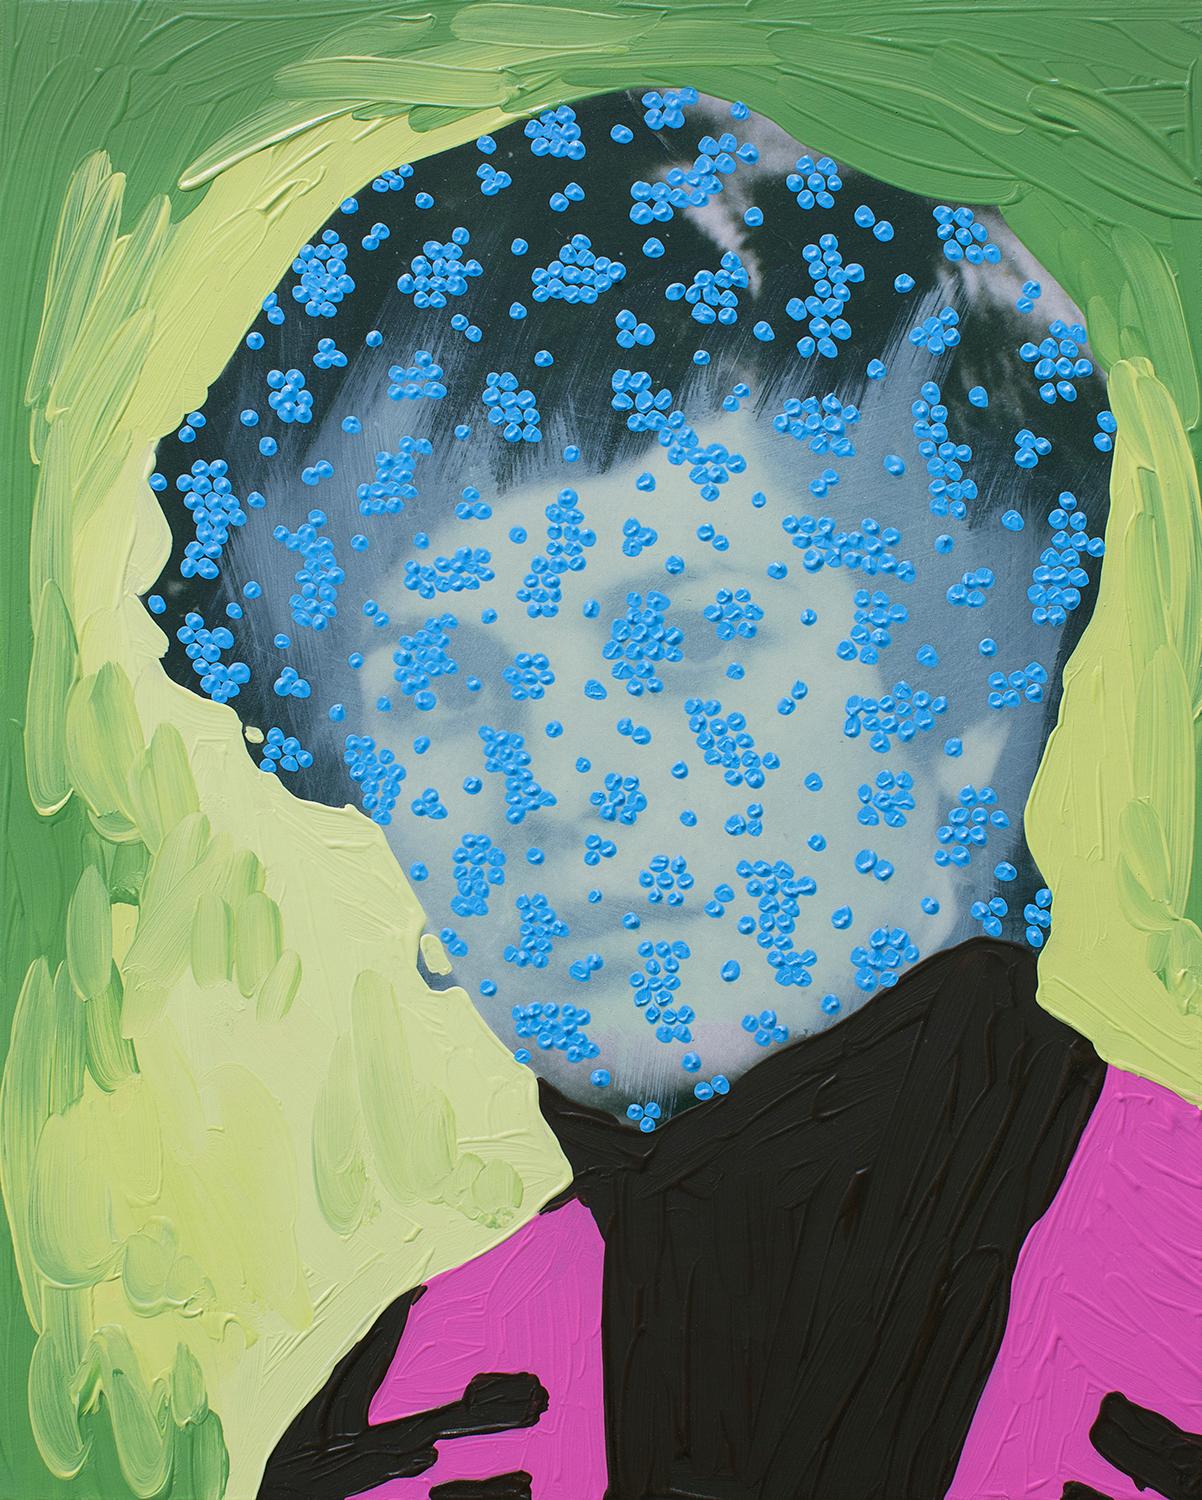 Daisy Patton Figurative Painting - Untitled (Green Woman with Blue Dots)